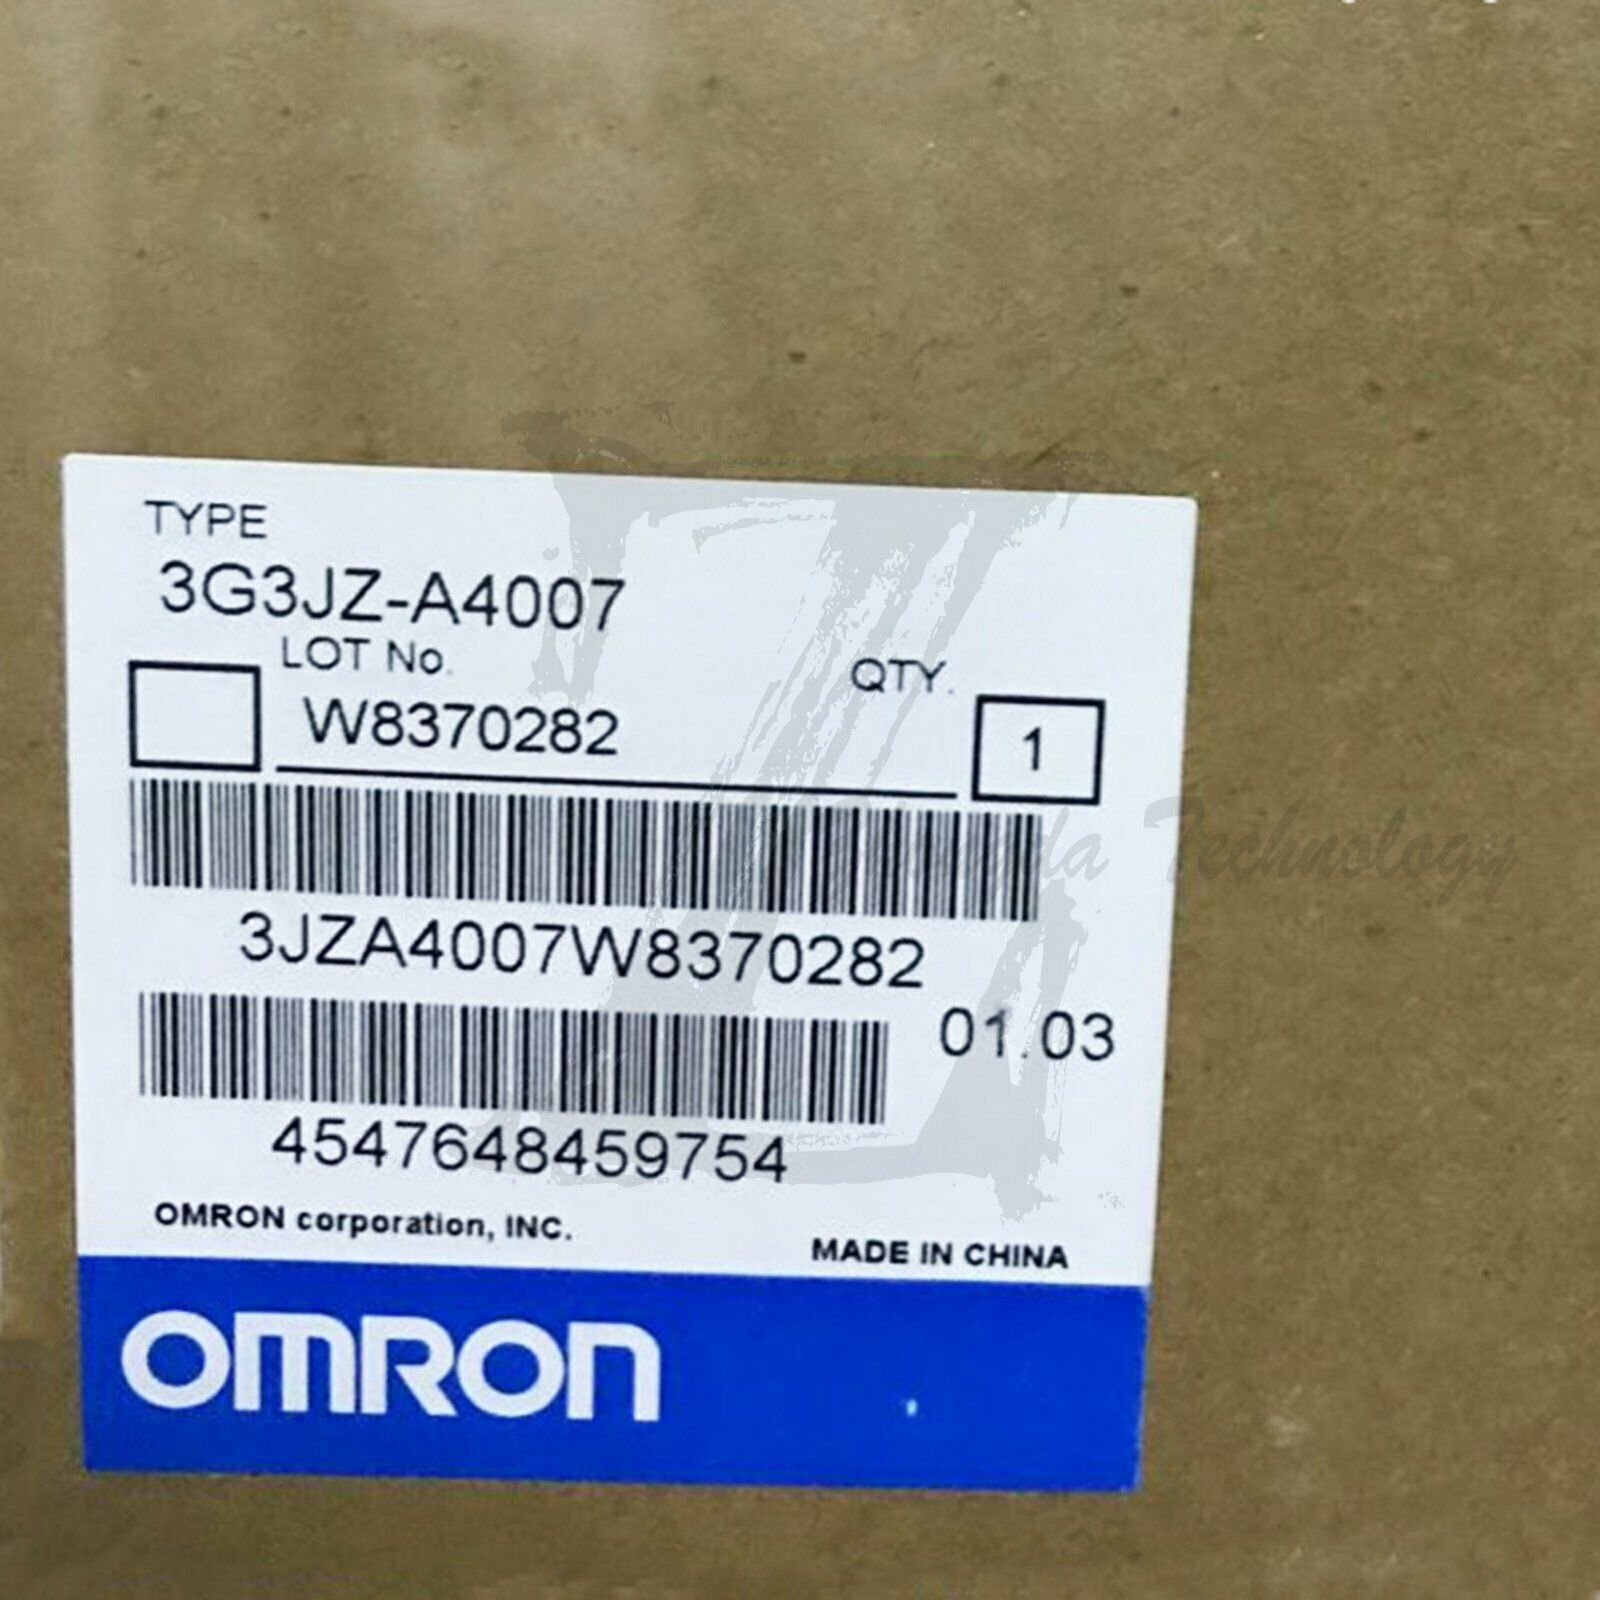 1Pc new Omron universal inverter 3G3JZ-A4007 one year warranty KOEED 201-500, 80%, import_2020_10_10_031751, Omron, Other